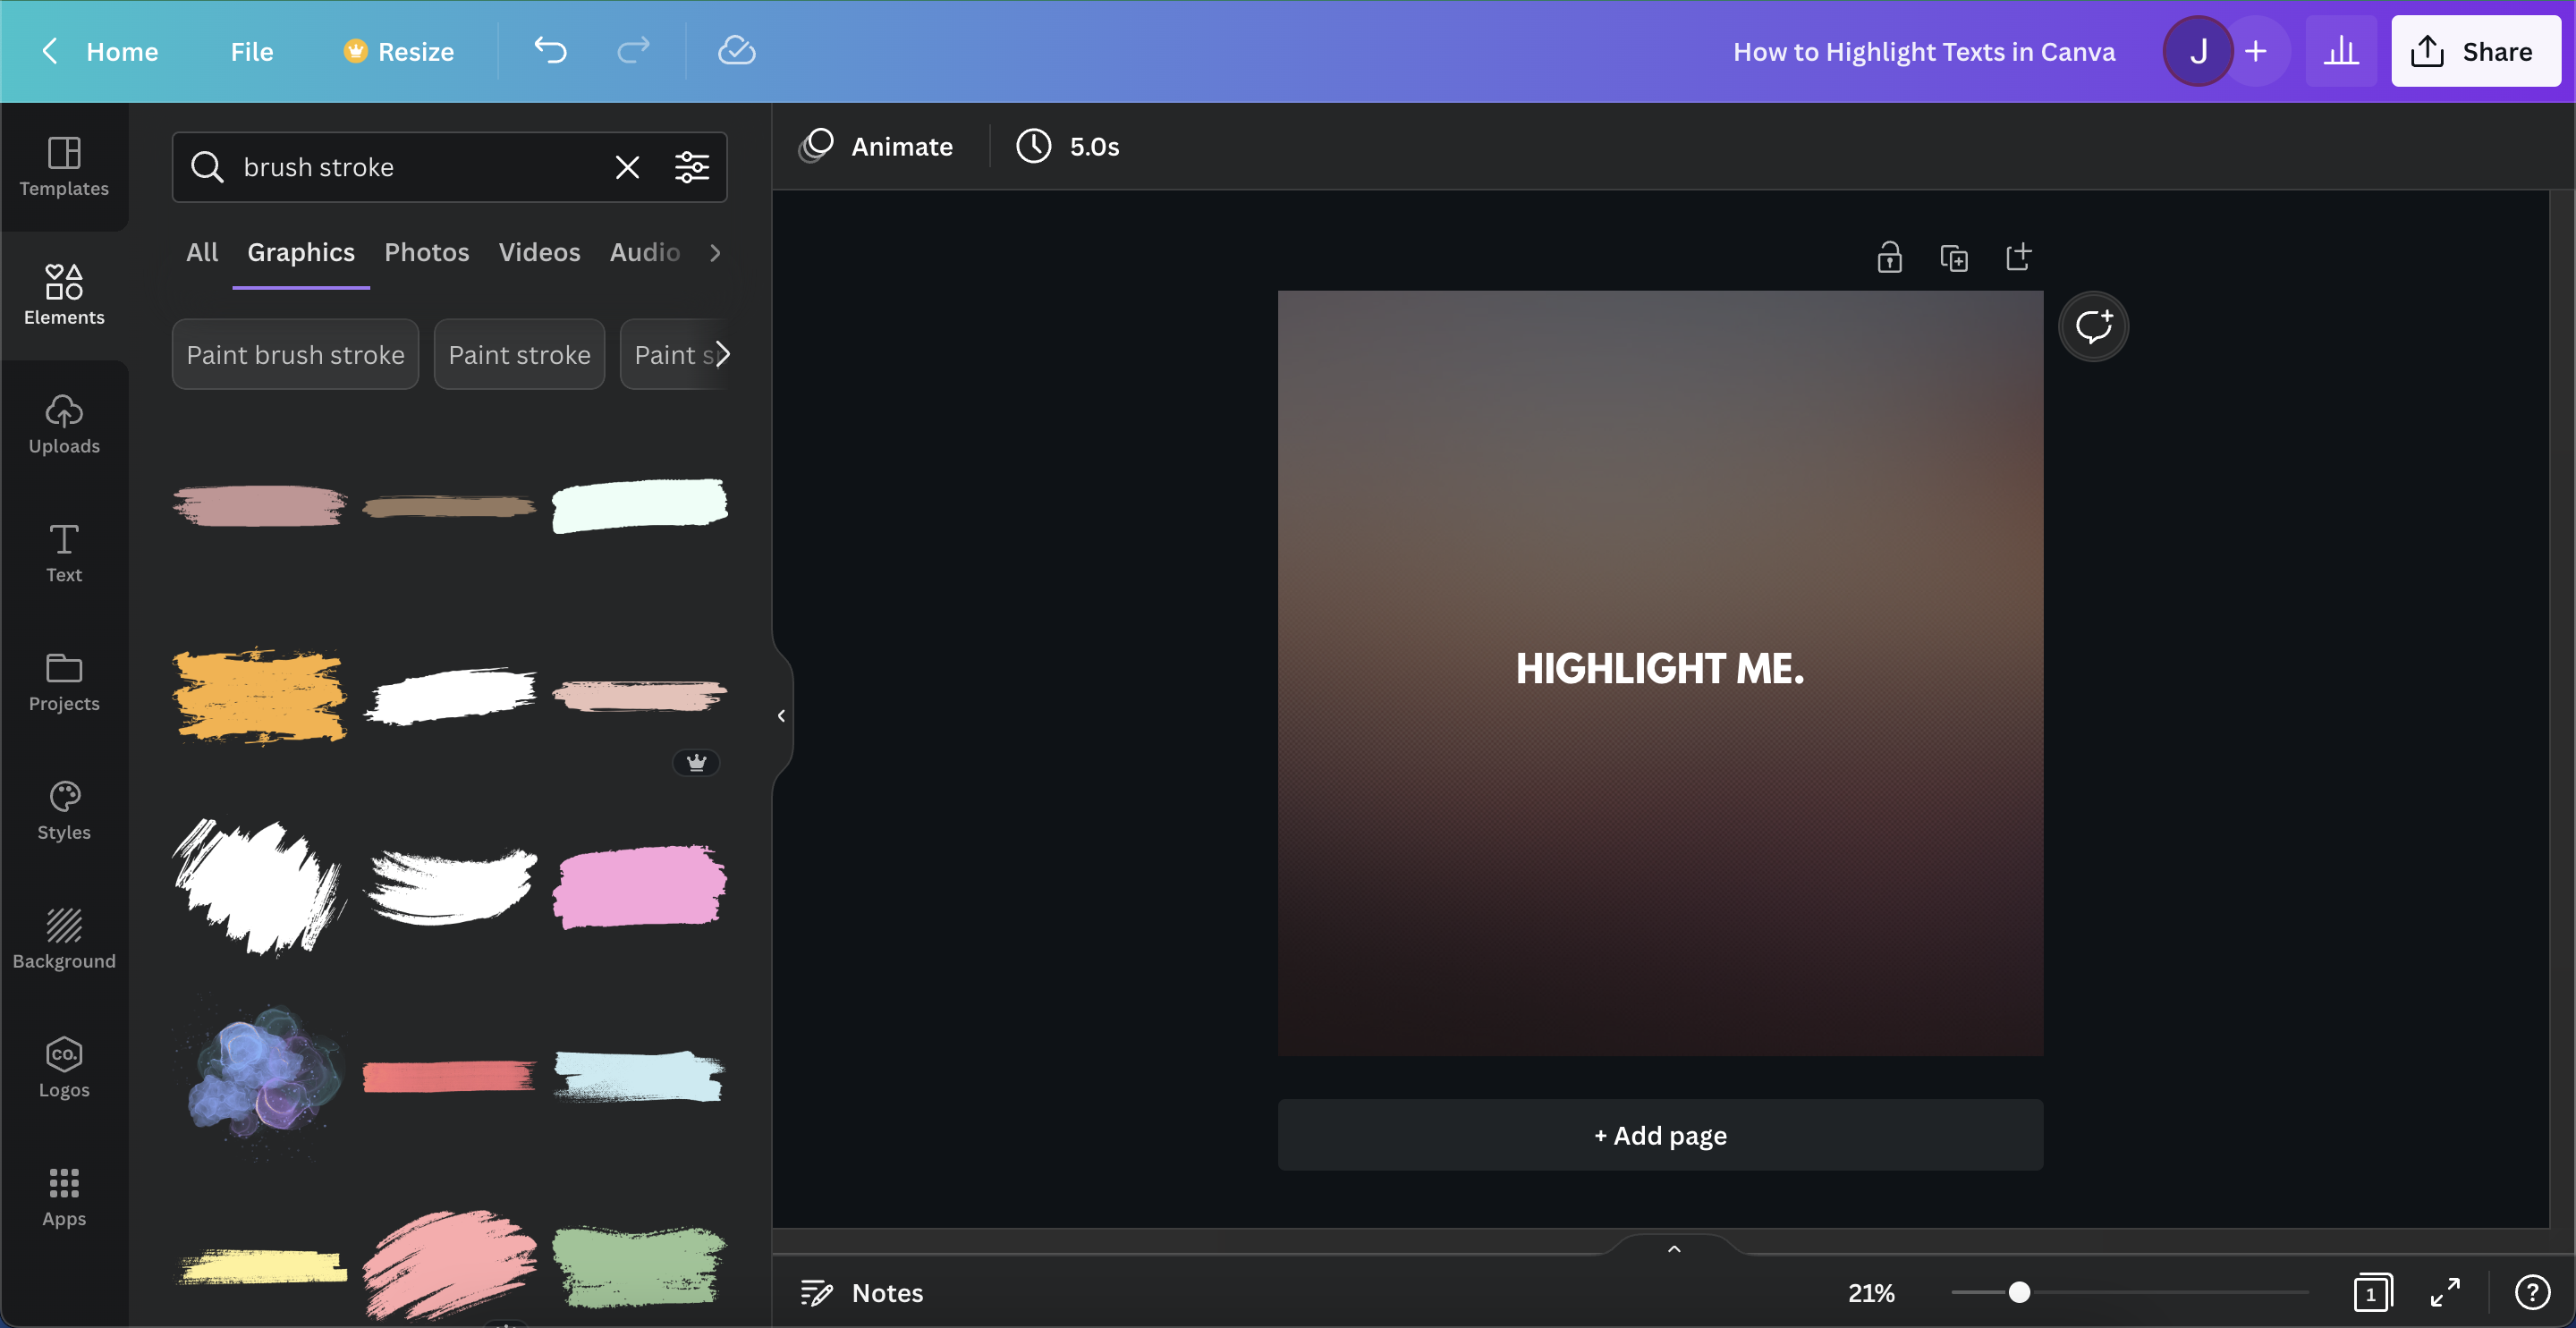 Highlight text in Canva 6